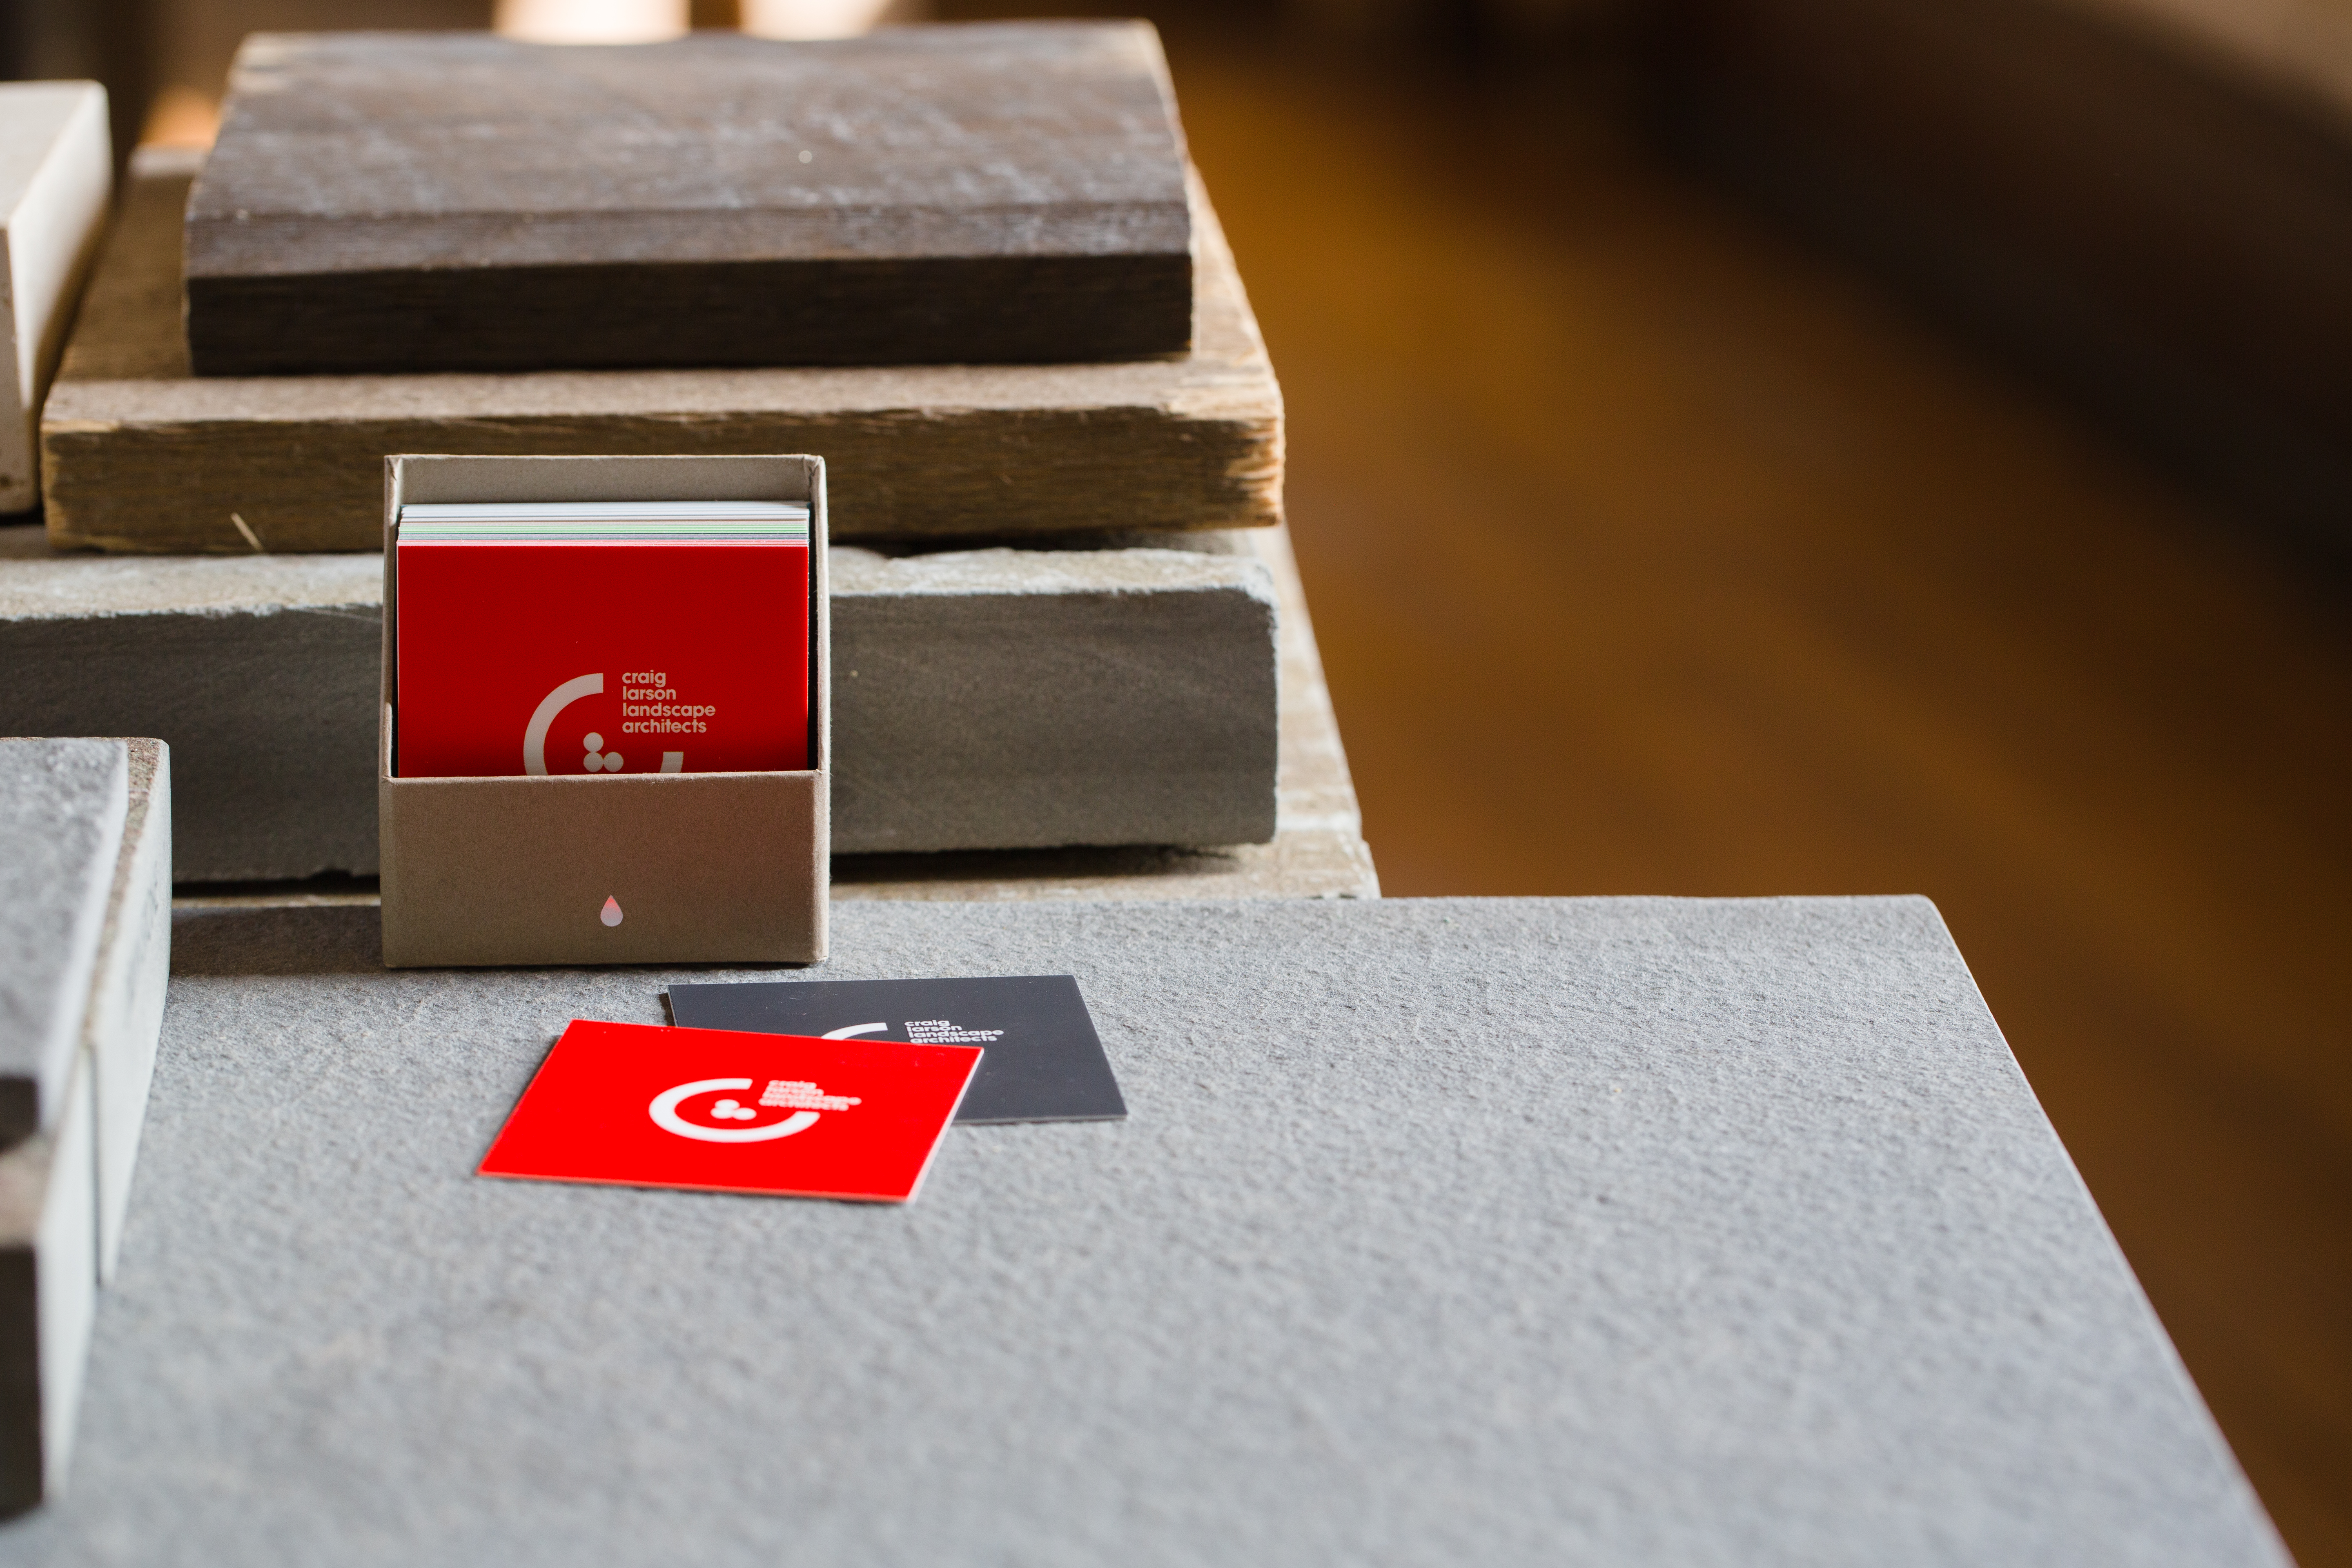 Box of red, branded, square business cards displaying the CLLA logomark sitting atop a stack of stone tiles